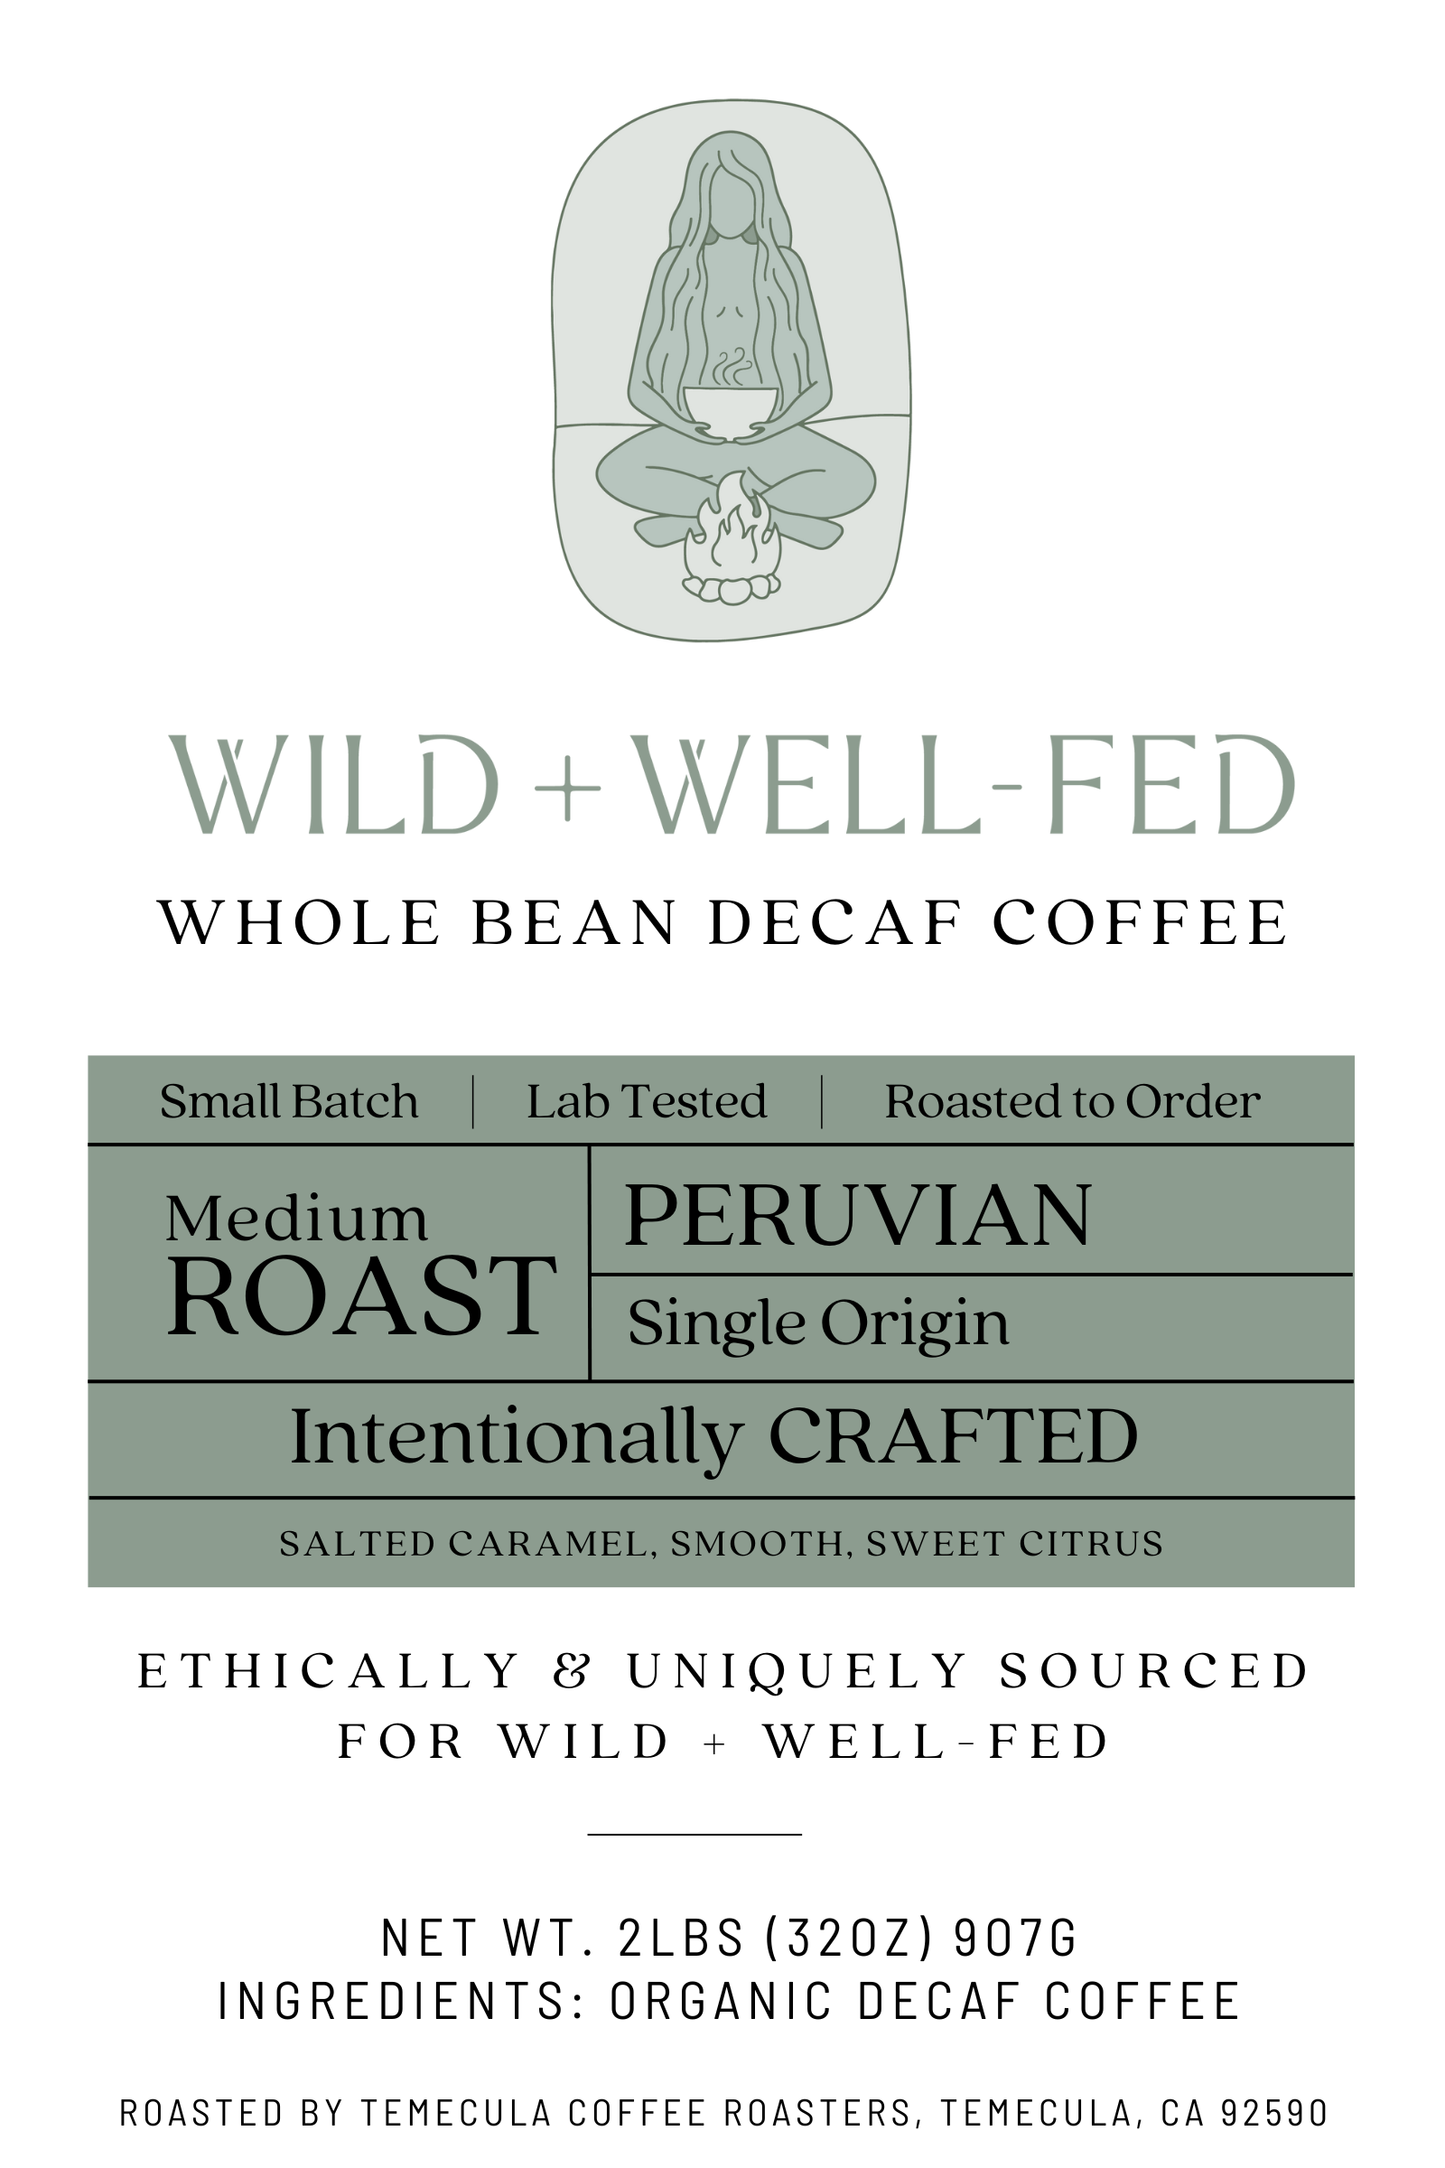 Close up image label of Whole Bean Decaf Coffee from Peru